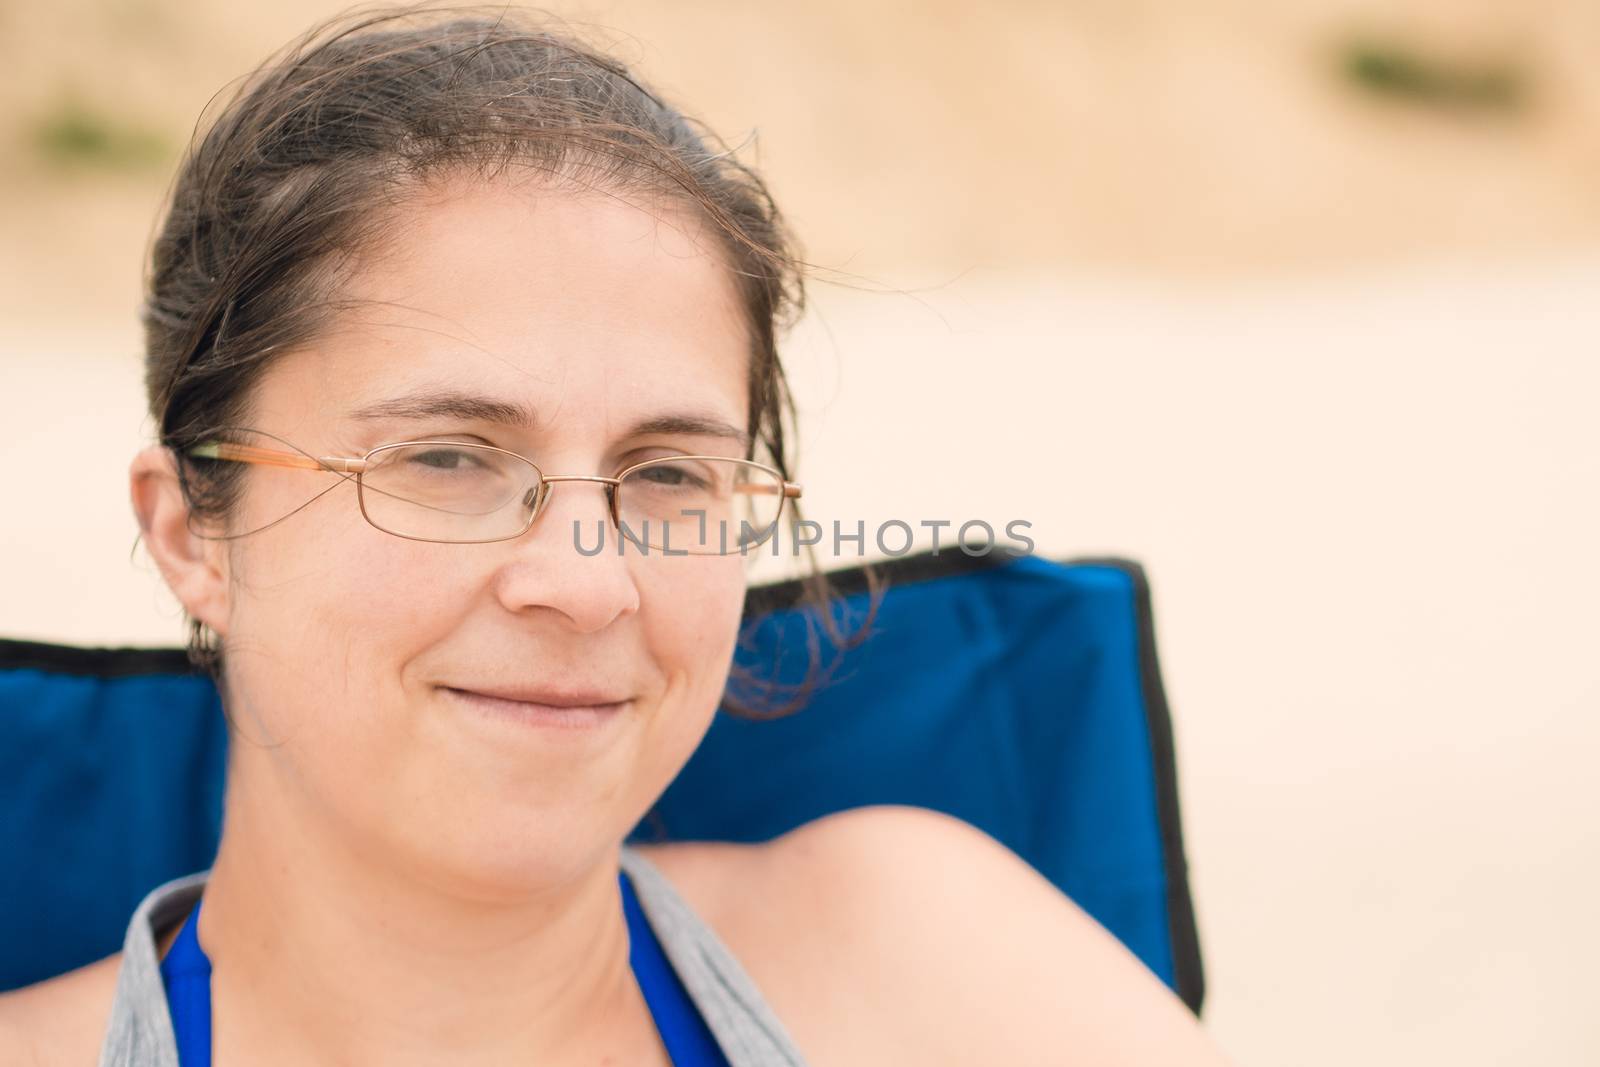 Woman smiling on the beach by Talanis